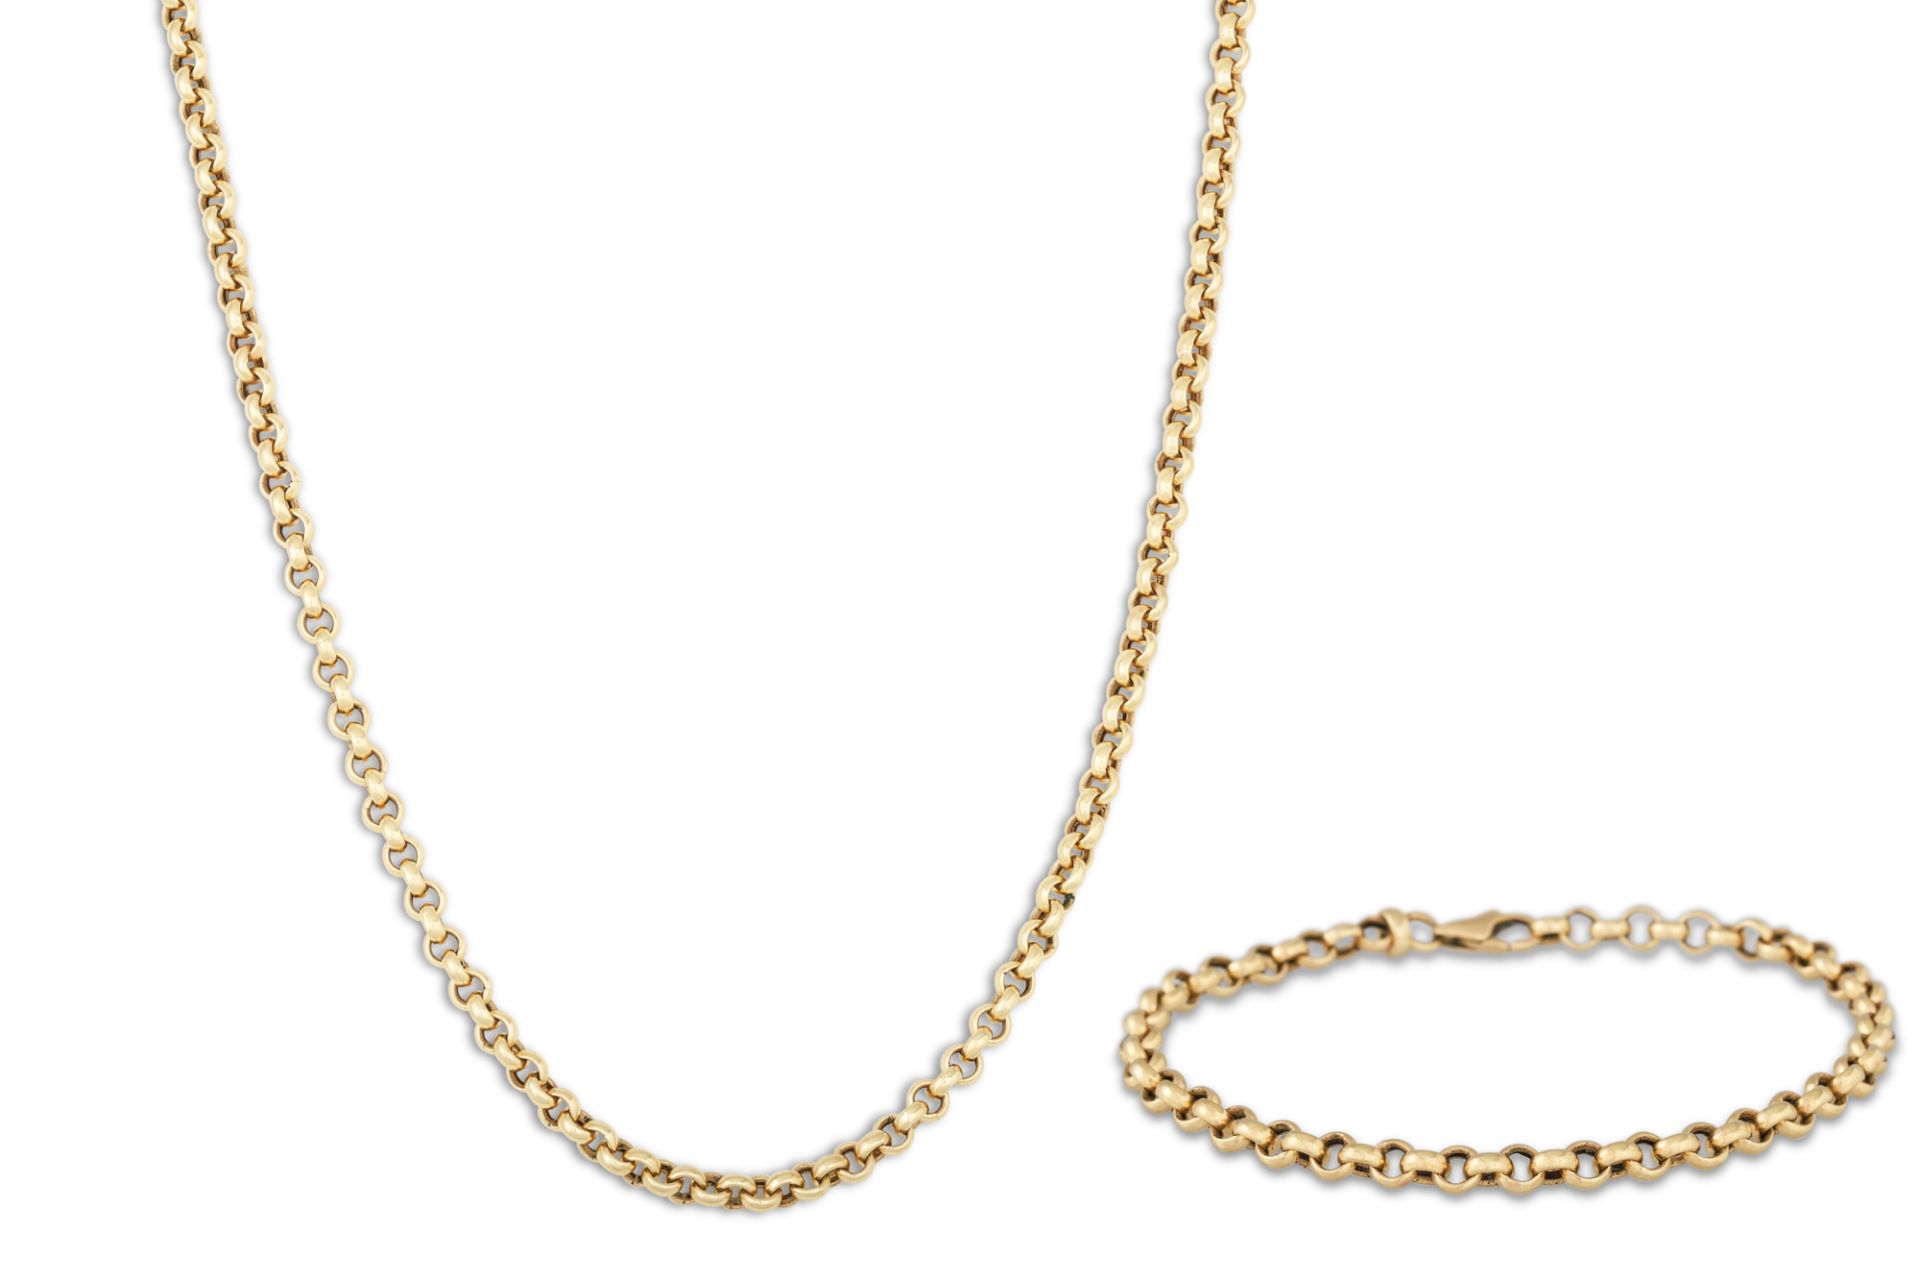 A 14CT GOLD NECK CHAIN, with matching bracelet, 28.5 g.